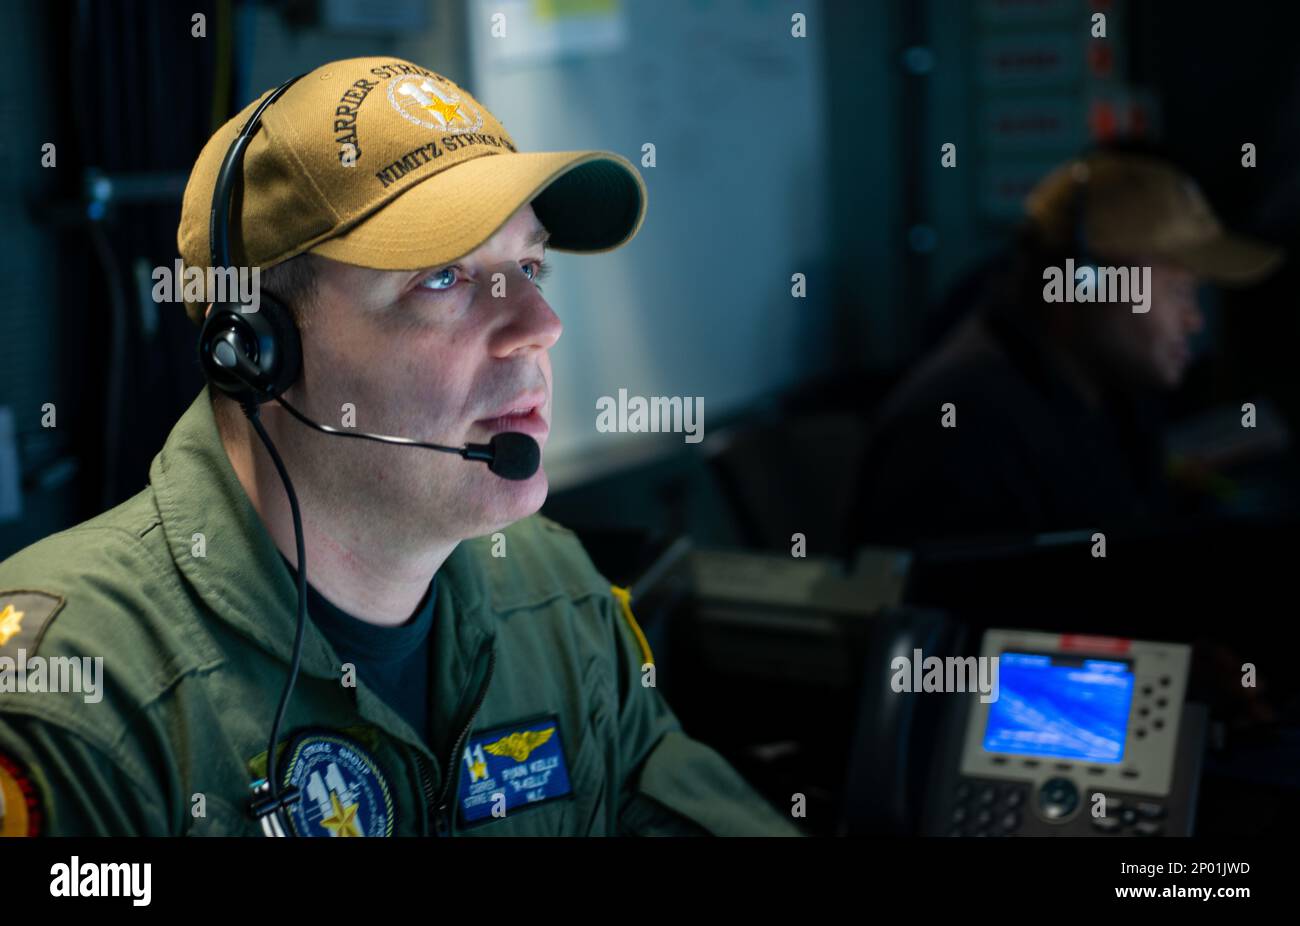 230216-N-WM182-1019 SOUTH CHINA SEA (Feb. 16, 2023) U.S. Navy Lt. Cmdr. Ryan Kelly, from Troy, N.Y., stands watch in the Tactical Flag Communication Center aboard the aircraft carrier USS Nimitz (CVN 68). Nimitz is in U.S. 7th Fleet conducting routine operations. 7th Fleet is the U.S. Navy's largest forward-deployed numbered fleet, and routinely interacts and operates with Allies and partners in preserving a free and open Indo-Pacific region. Stock Photo